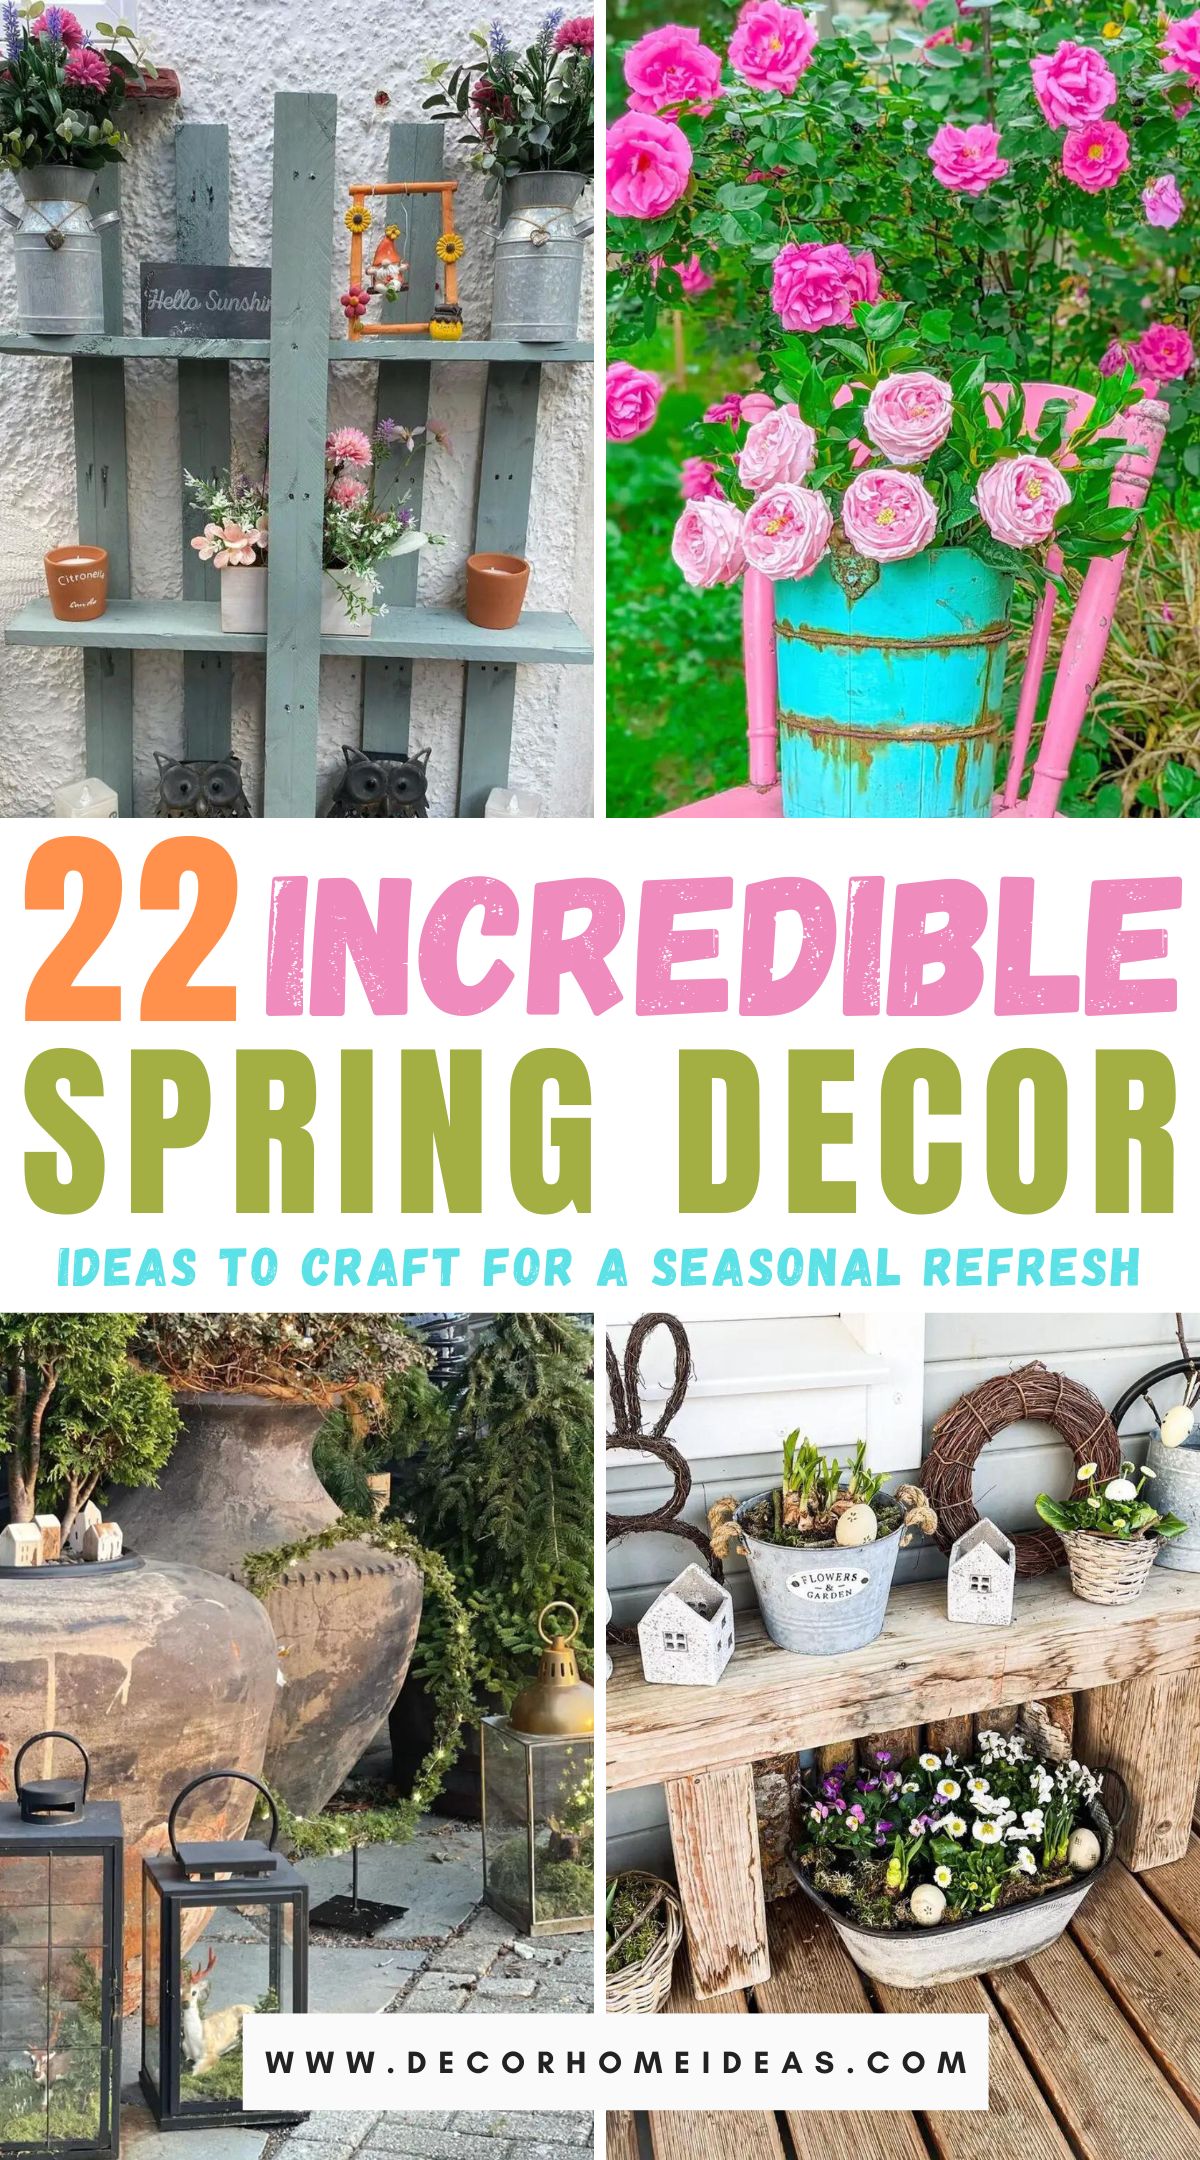 Discover 22 creative and easy DIY garden decoration ideas to enhance your outdoor space this season. From charming handcrafted accents to rustic, upcycled treasures, find inspiration to make your garden the highlight of the upcoming season.